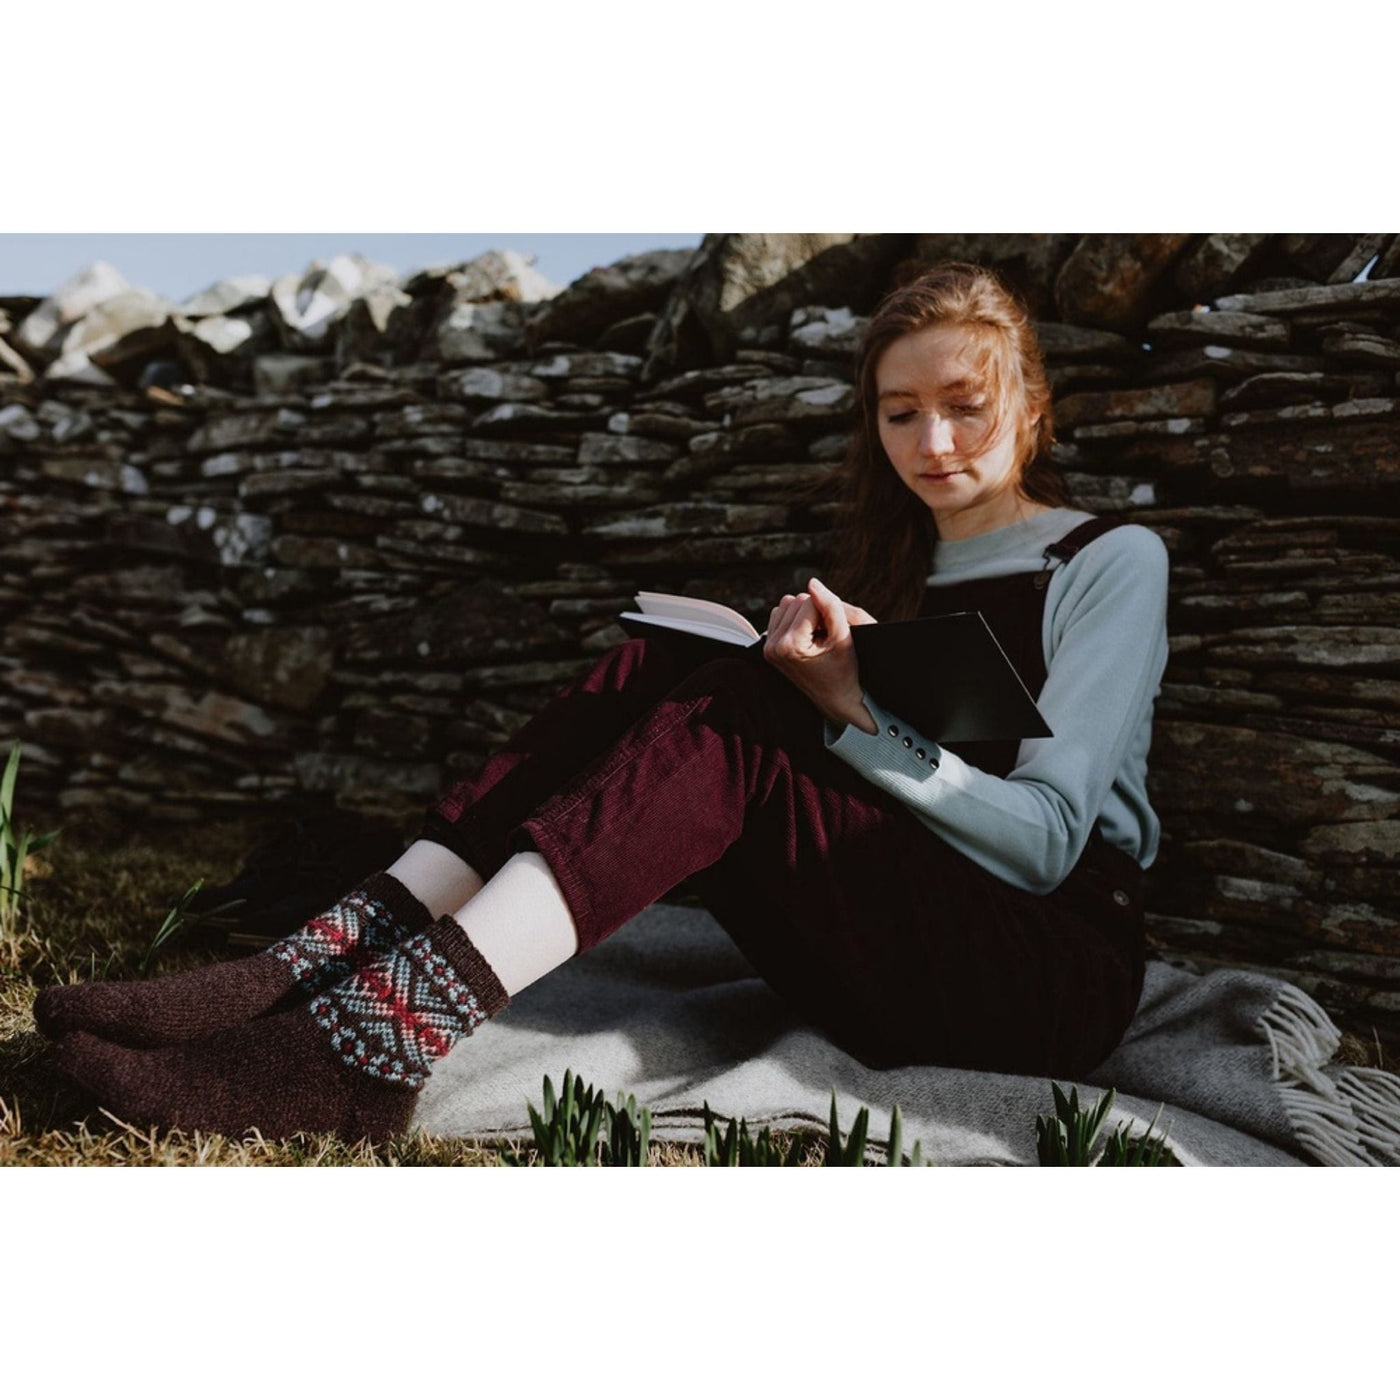 Page of Shetland Wool Adventure Journal 4, showing woman reading with colorwork socks showcasing a pattern in the book. 